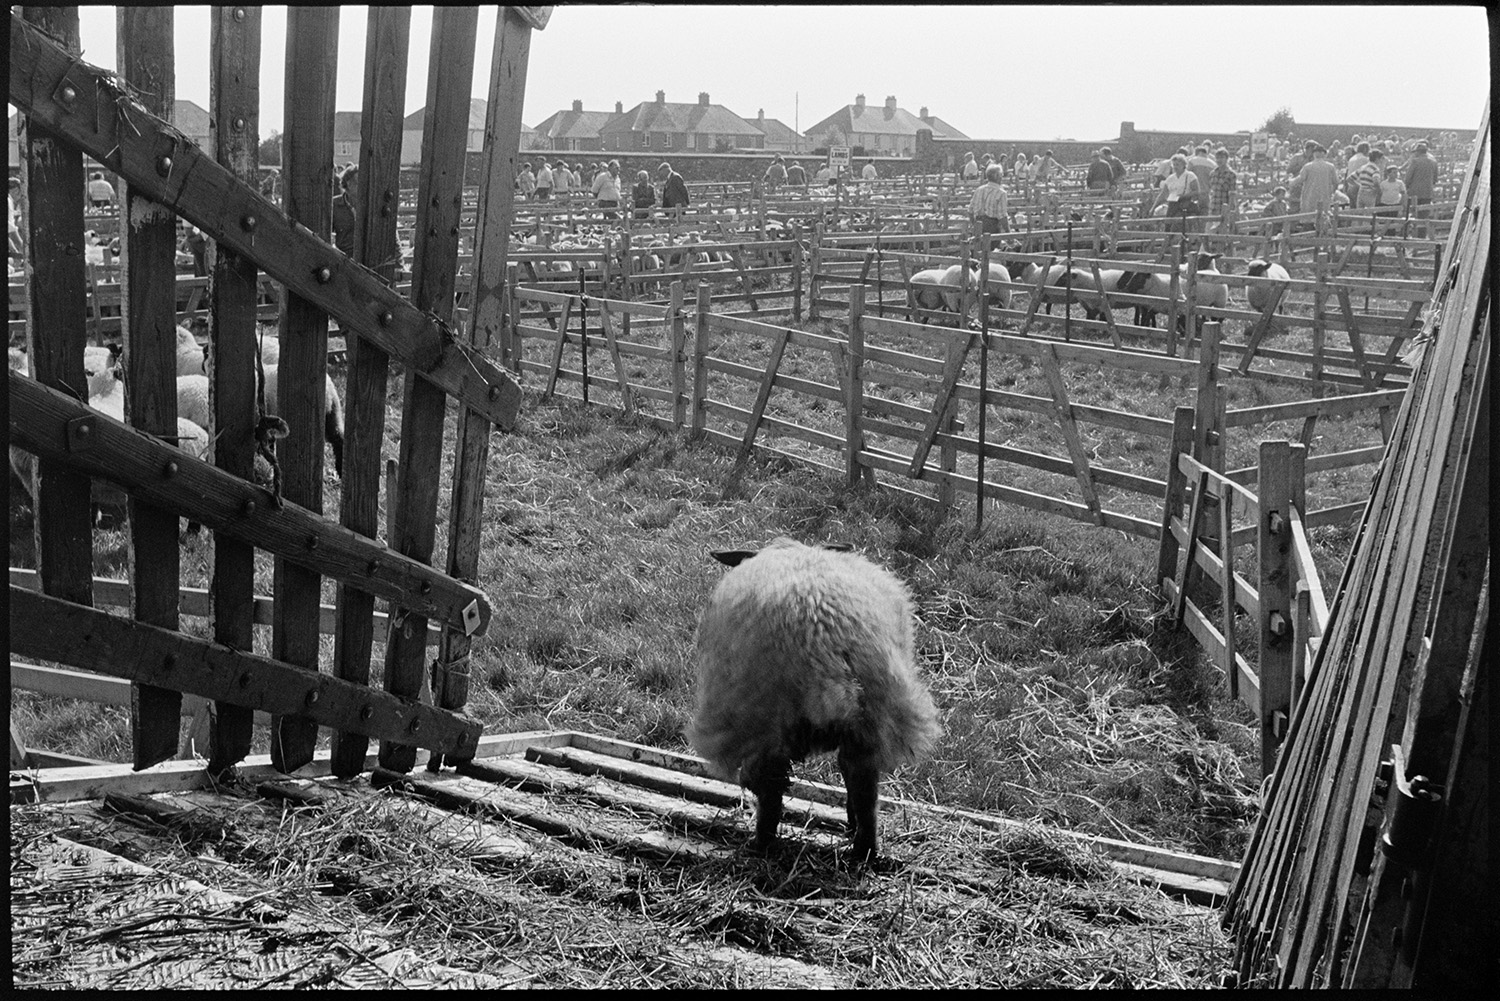 View over pens at sheep fair. <br />
[A sheep walking down the ramp attached to an animal transporter into a pen at South Molton Sheep Fair. People looking at sheep in other pens can be seen in the background.]